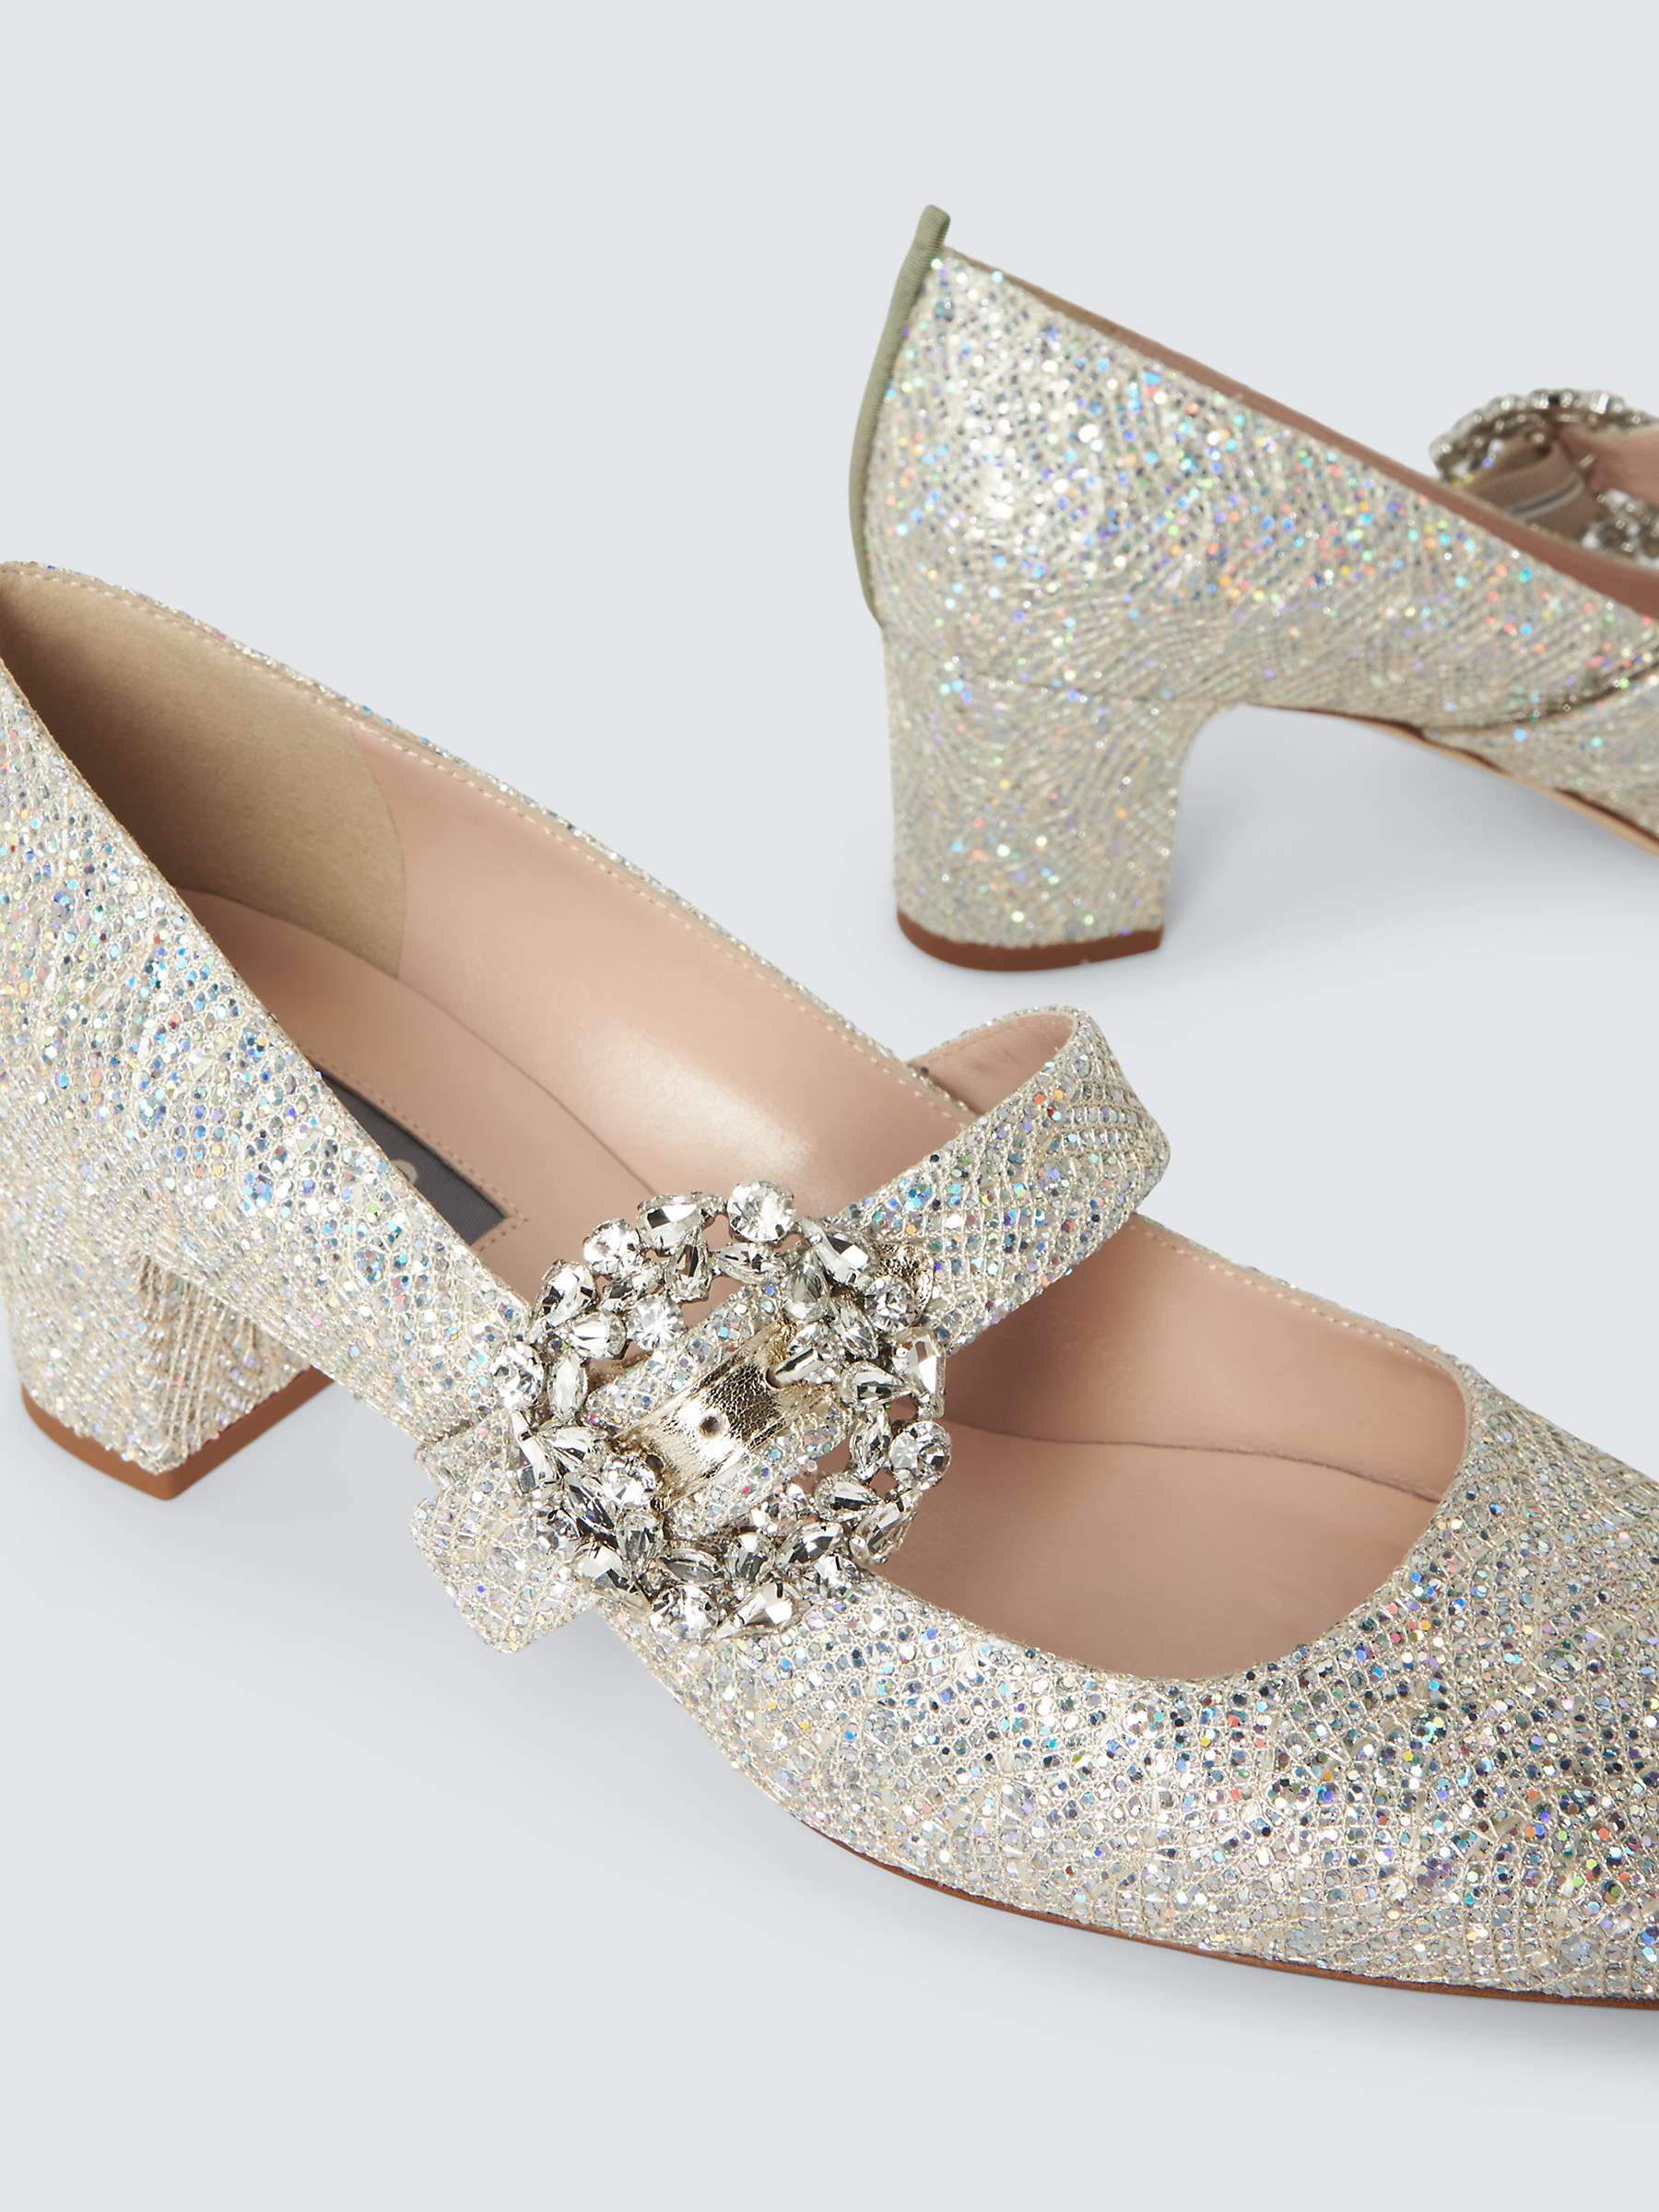 Buy SJP by Sarah Jessica Parker Cosette Mary Jane Court Shoes, Blizzard Glitter Online at johnlewis.com